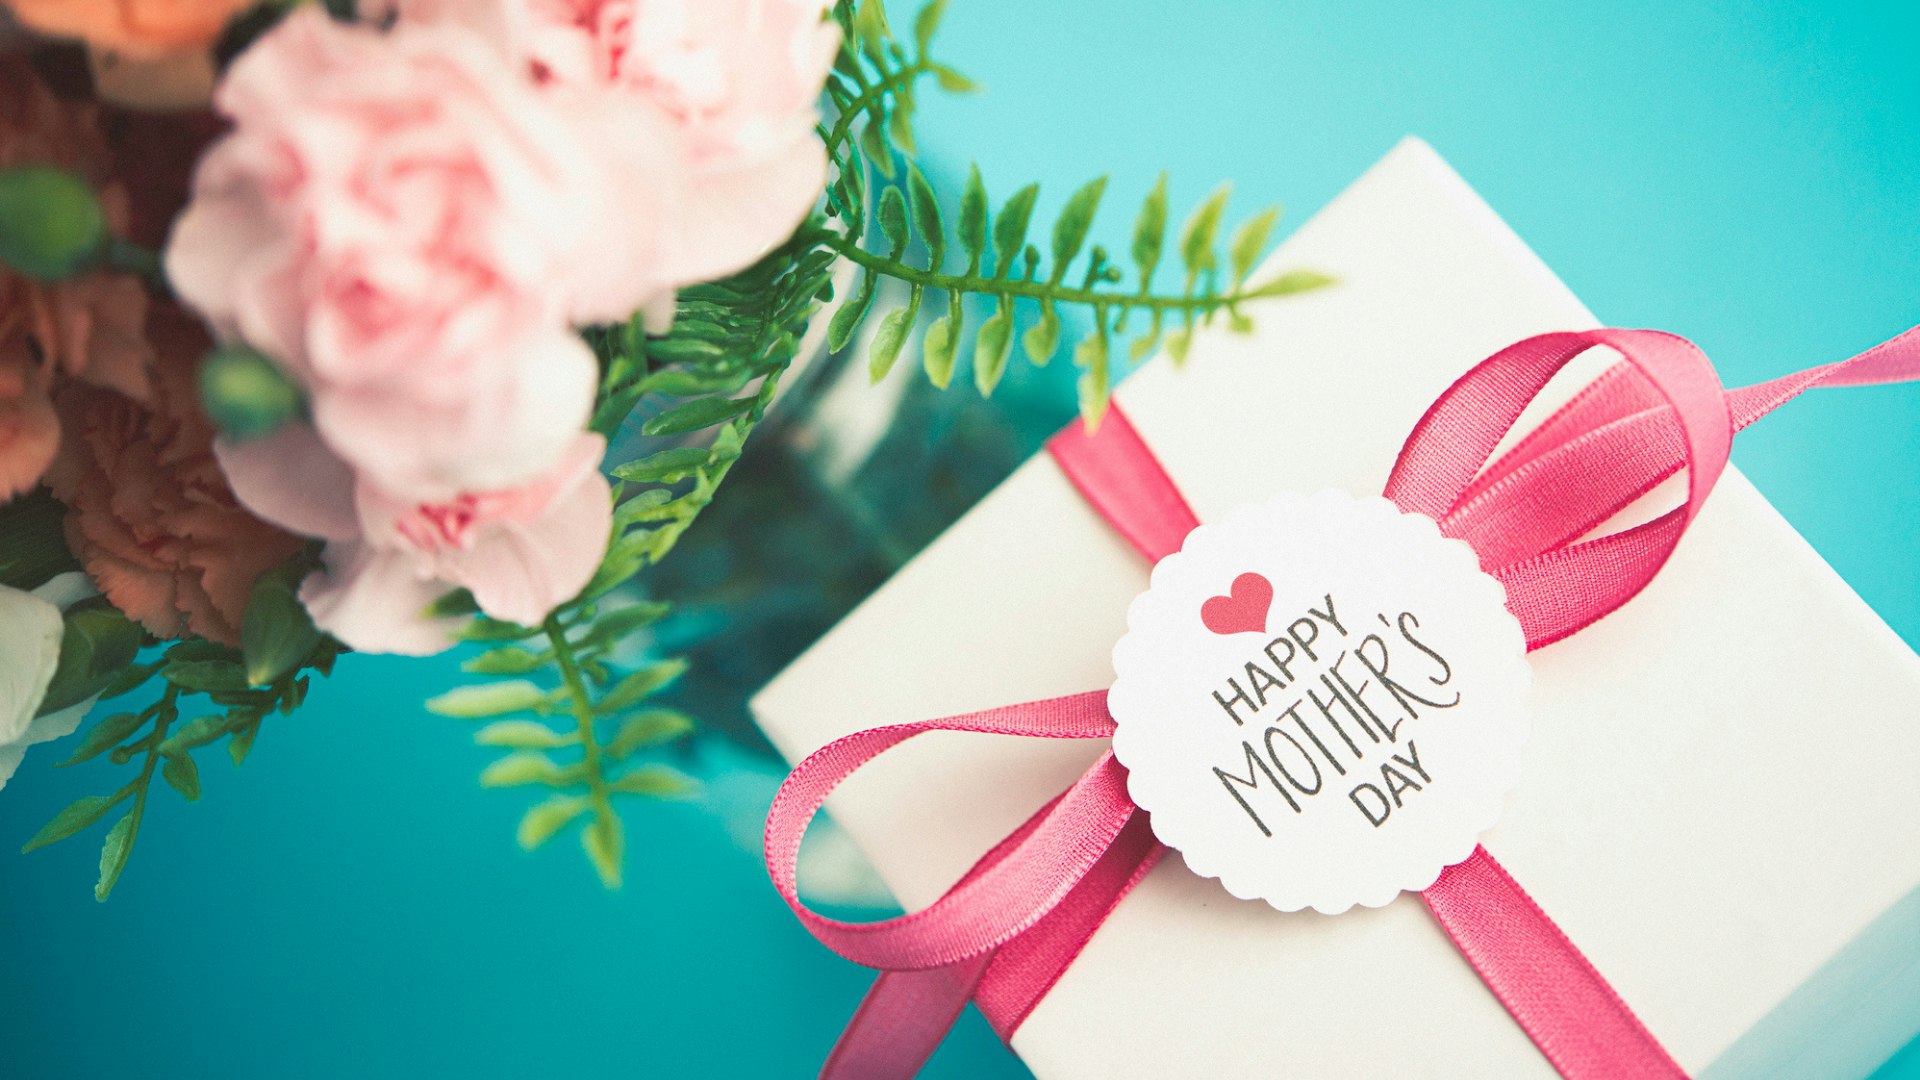 Best Happy Mother's Day Messages and Quotes for Friends - Lola